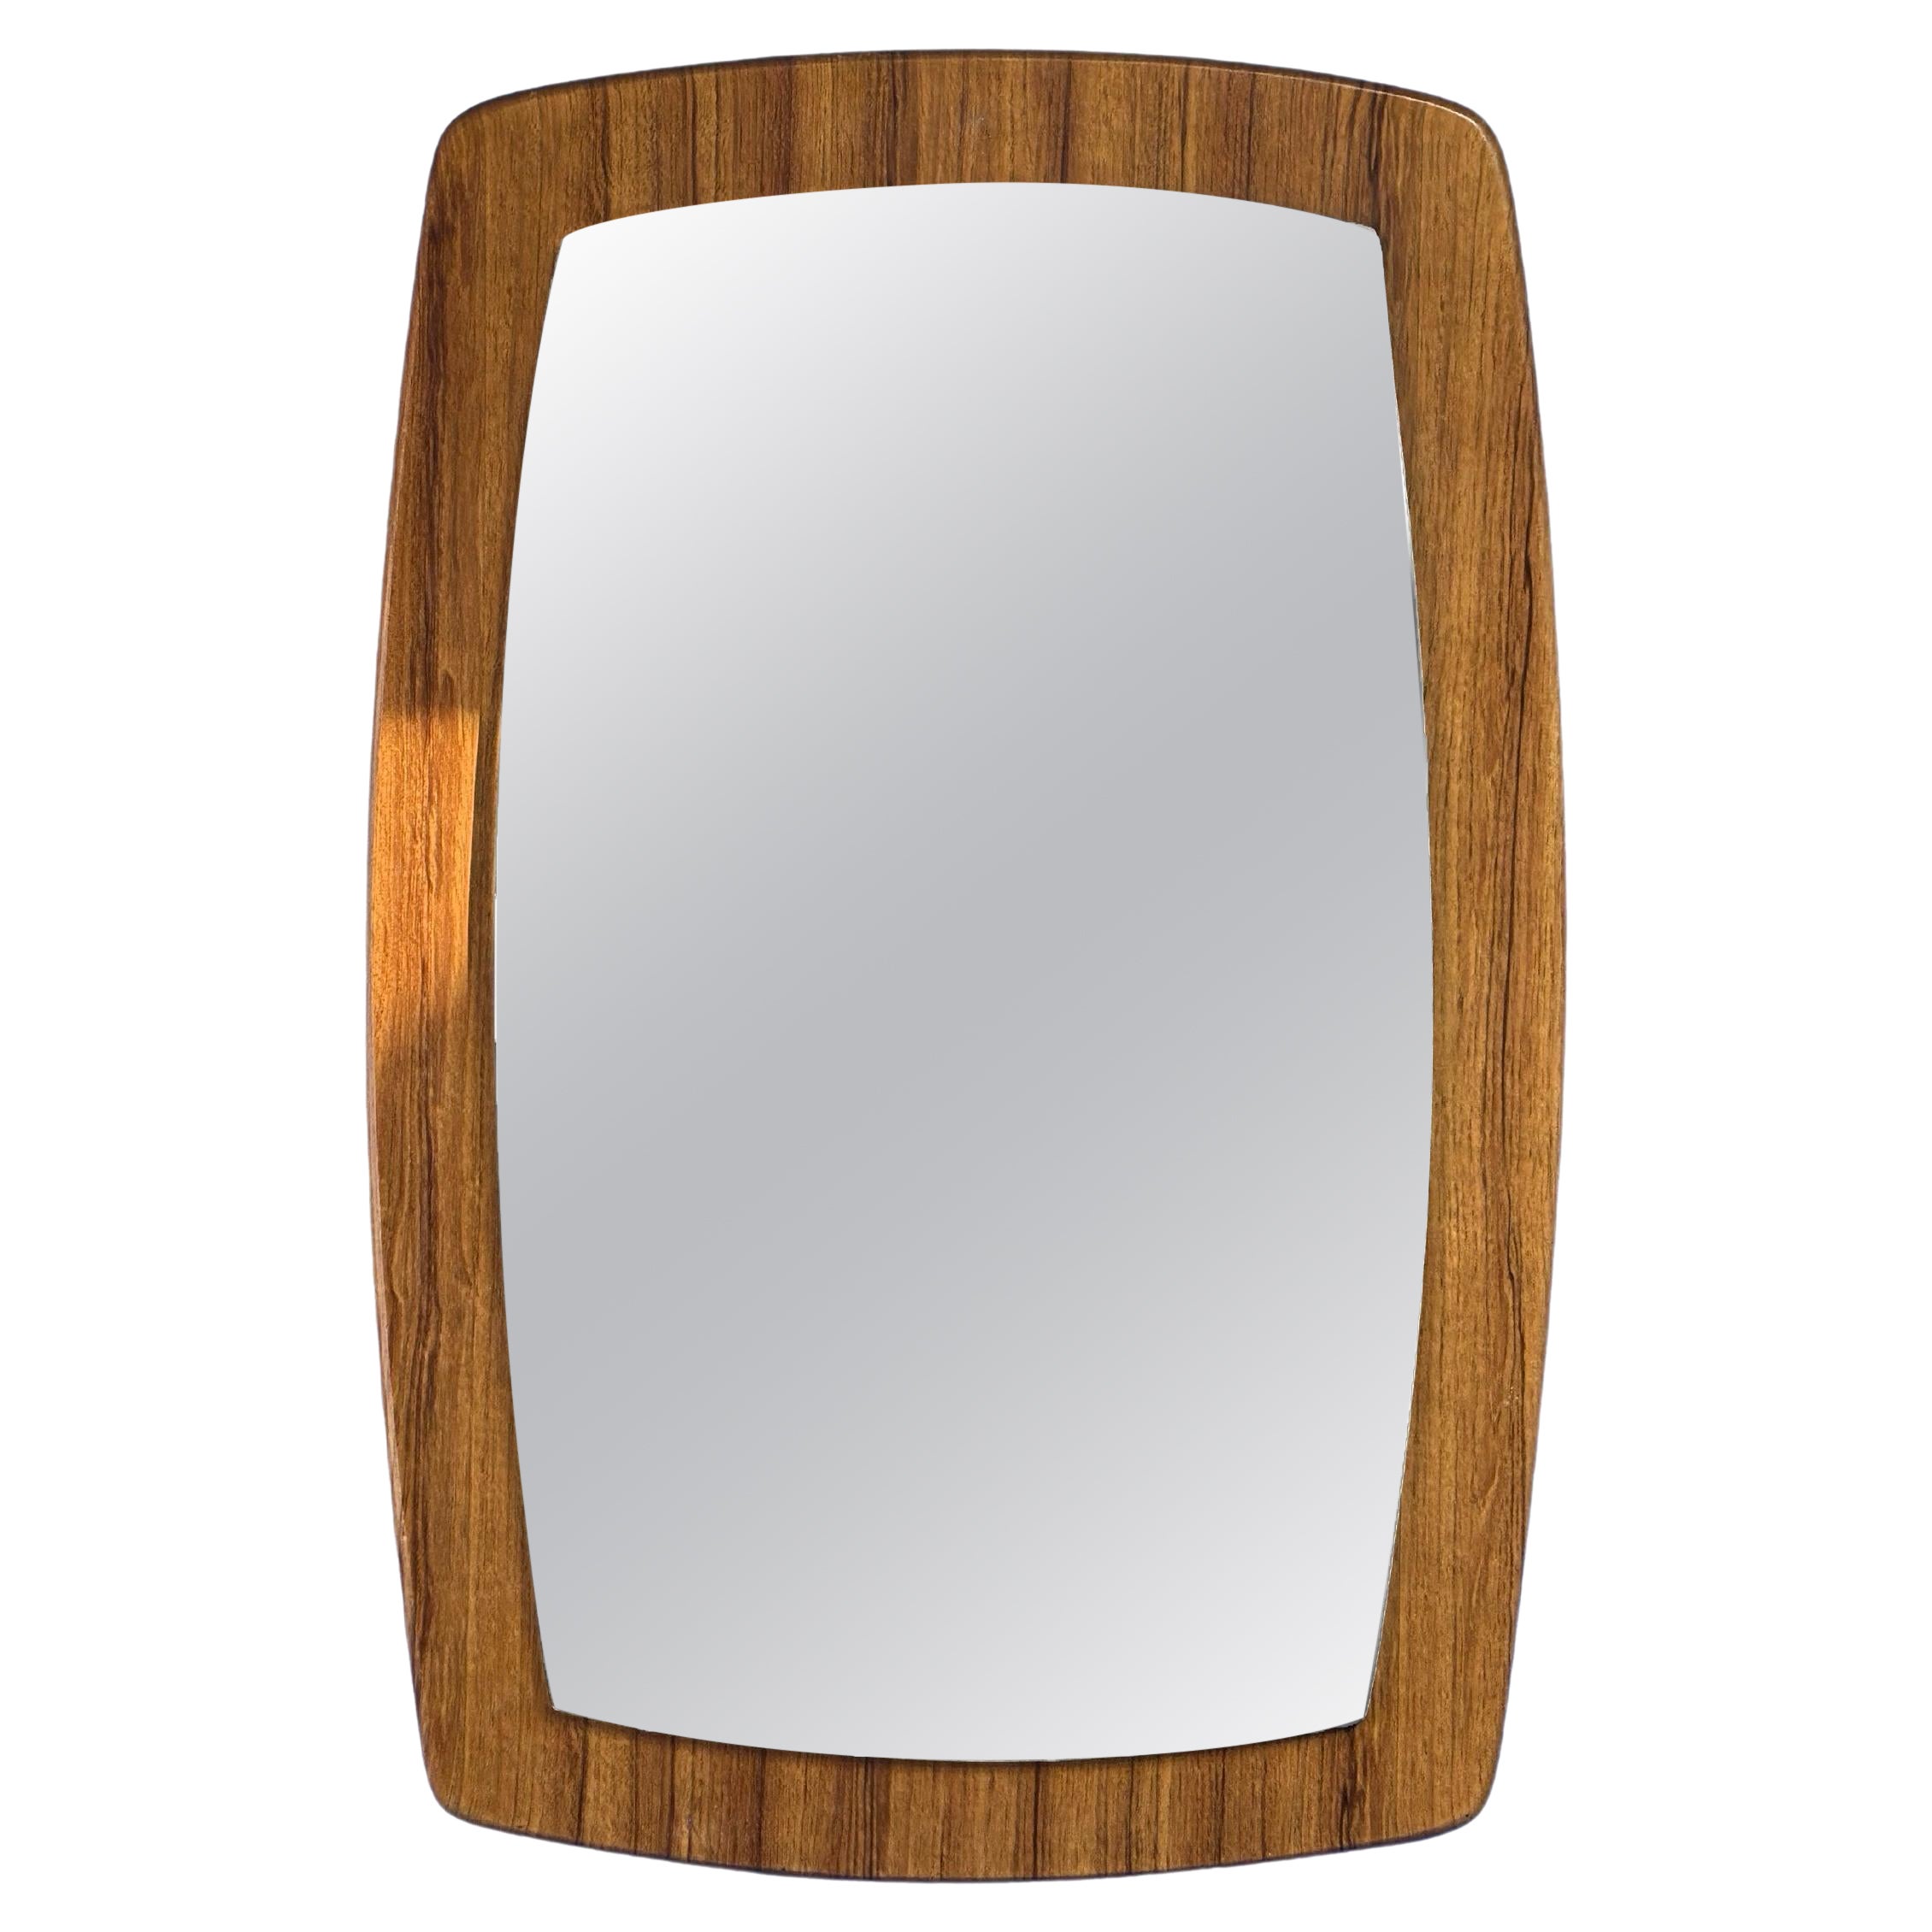 Mid-Century, Danish Style, Formica, Teak Wood Effect, Wall Mirror  For Sale